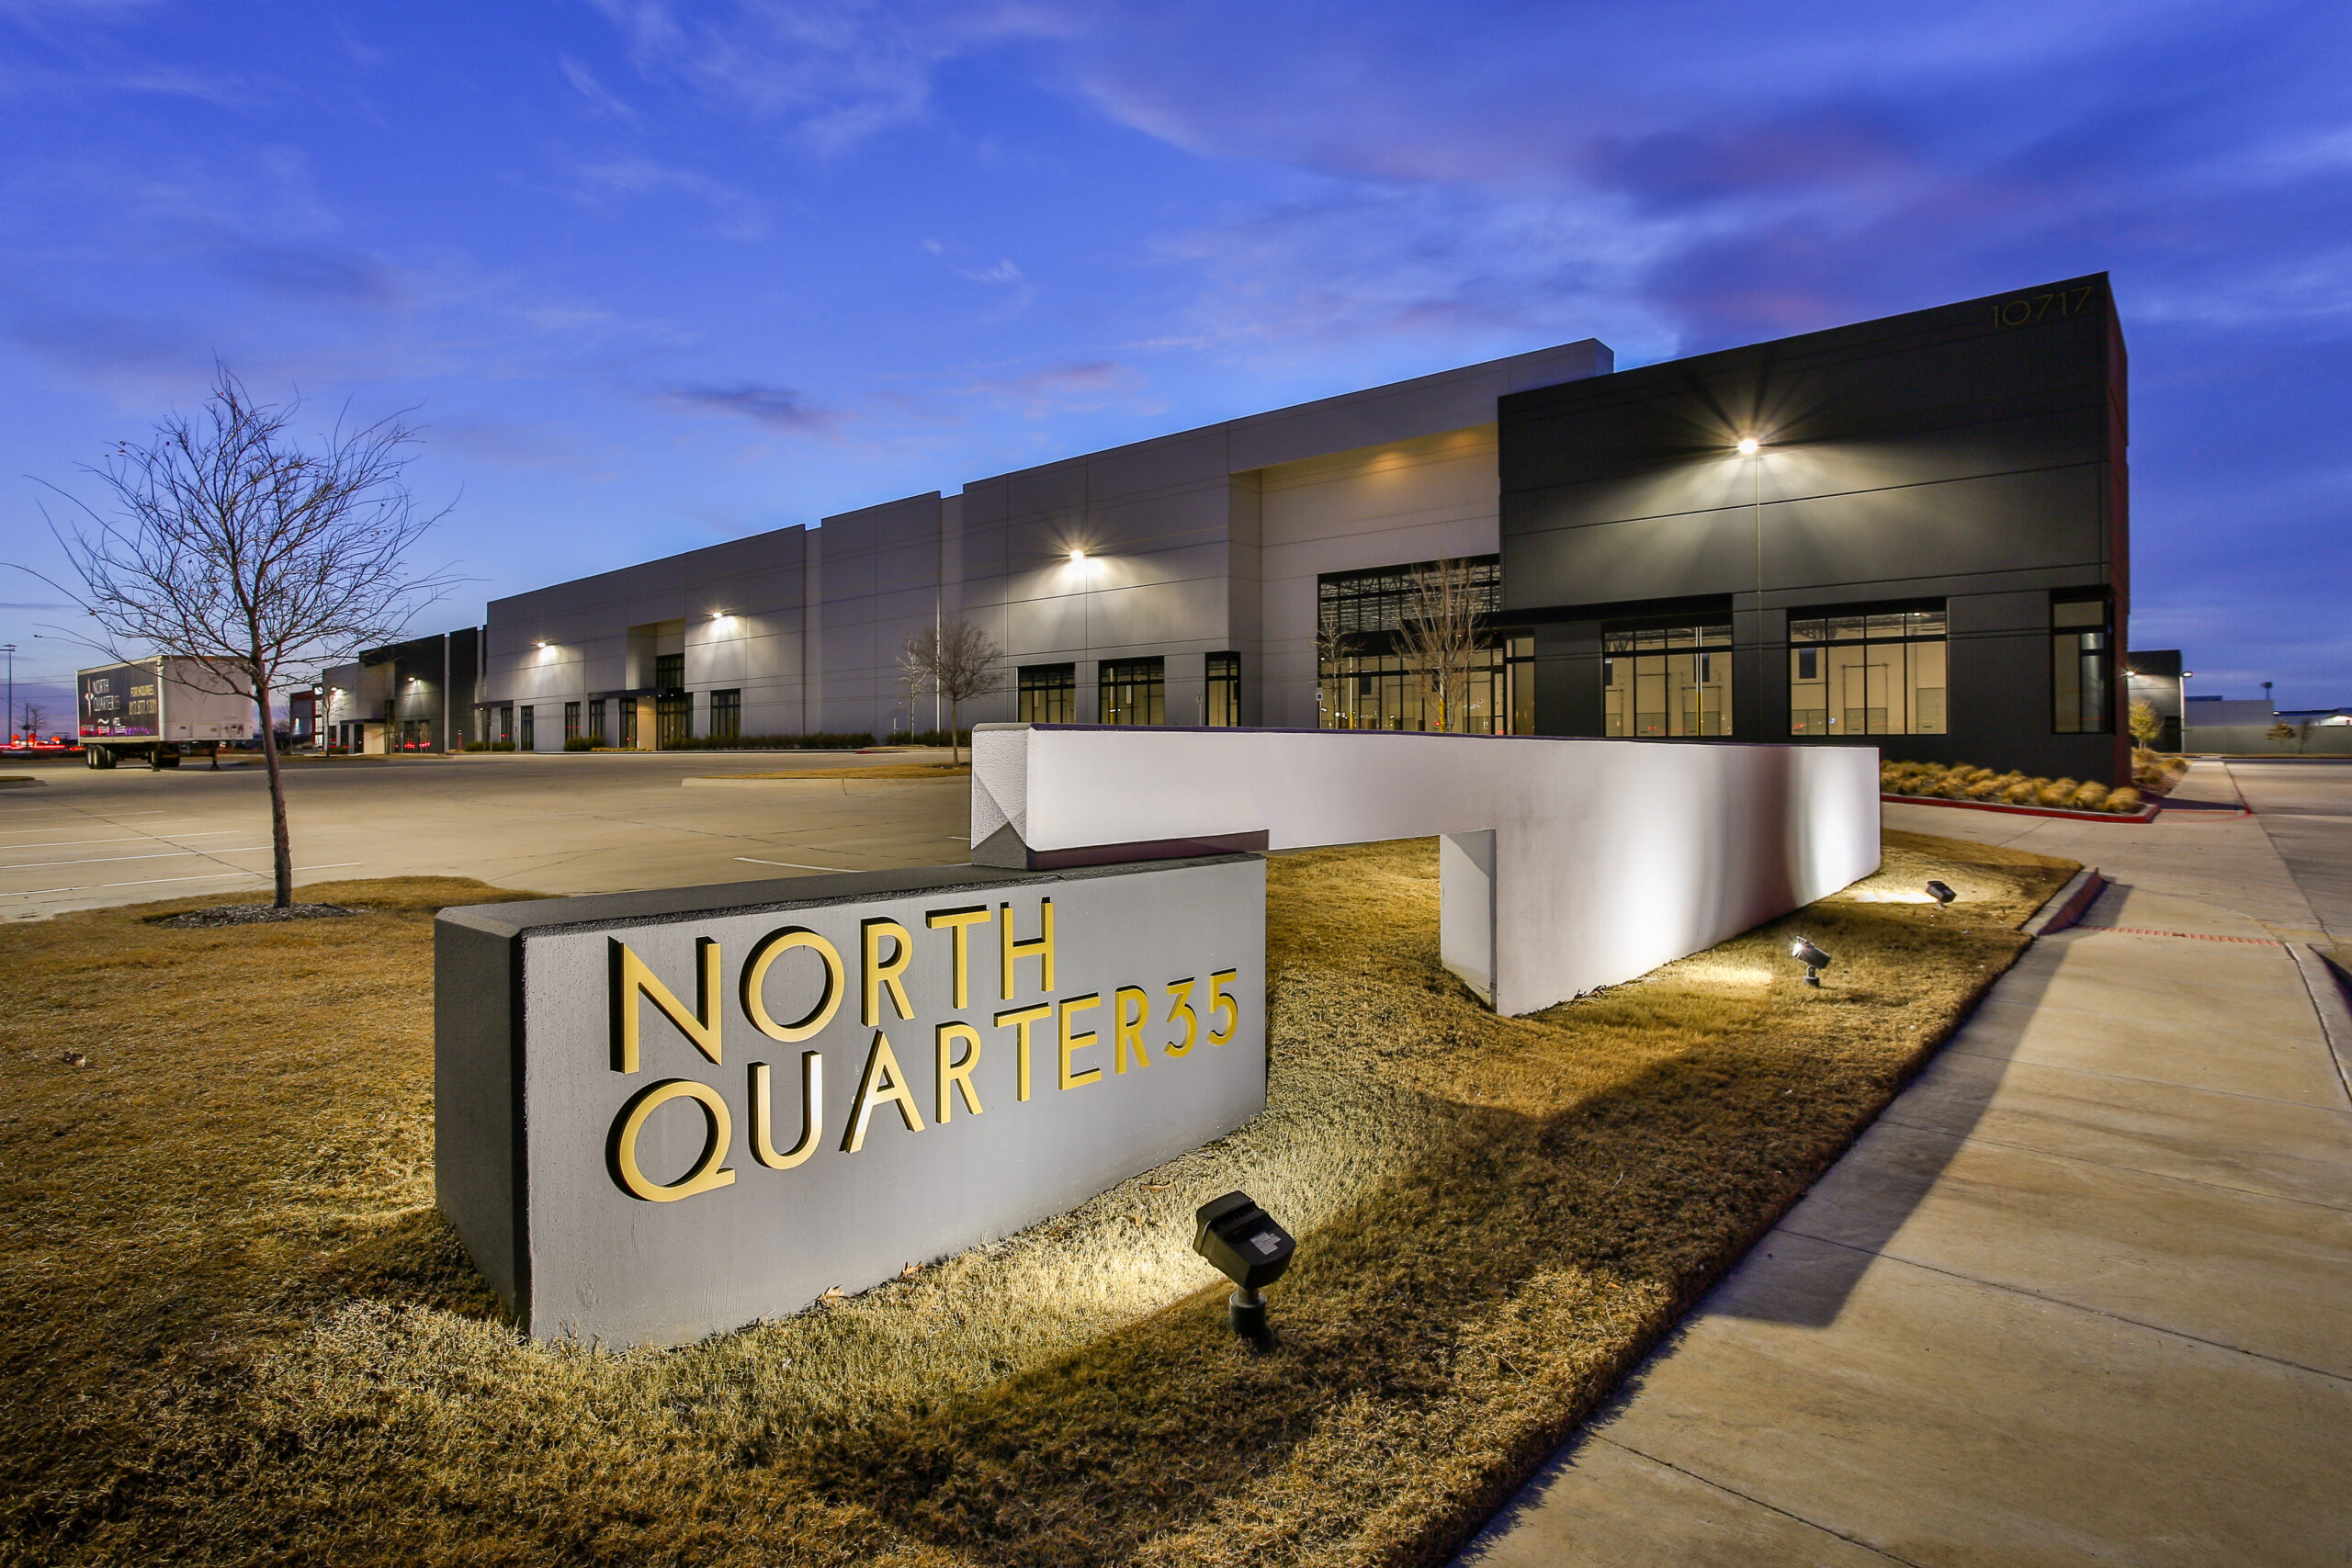 westcore-grows-texas-portfolio-to-5-5m-sf-with-fort-worth-acquisition